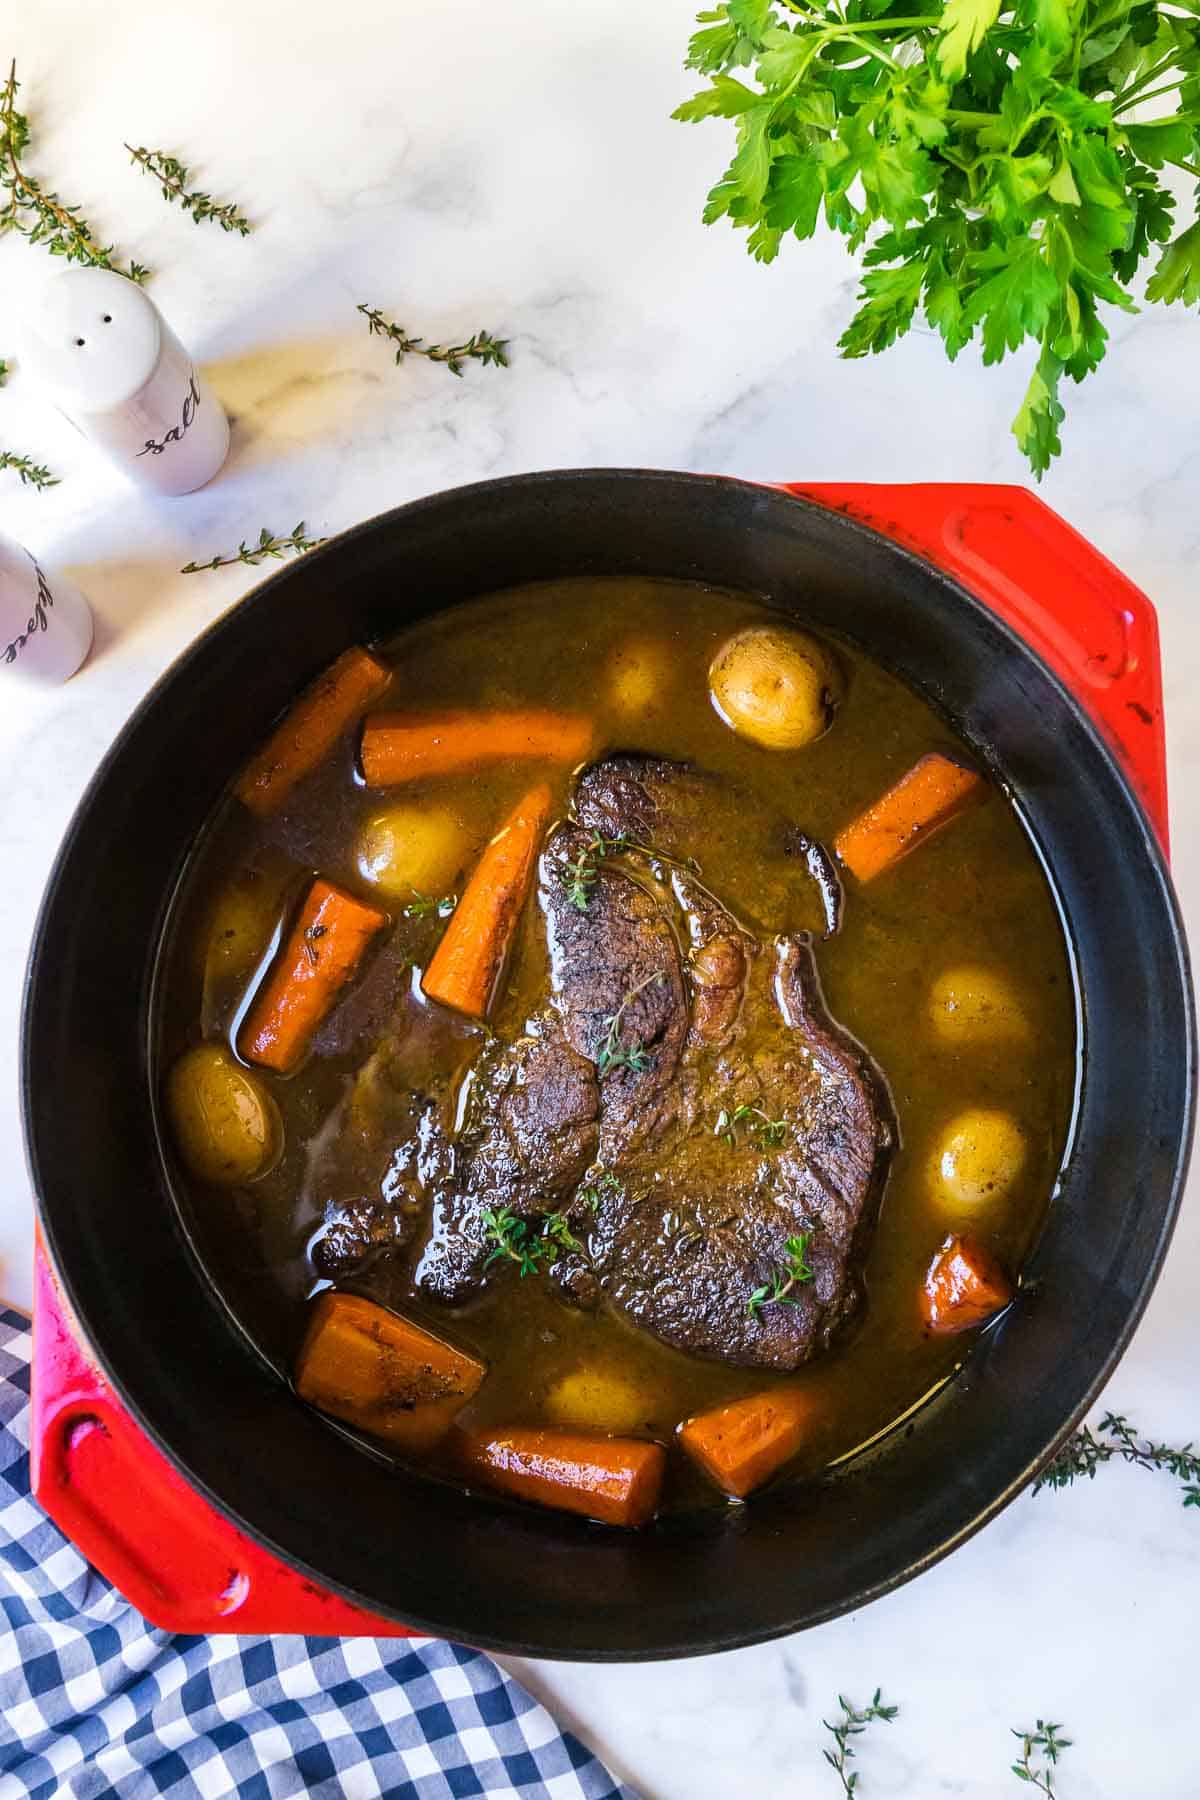 Old-fashioned pot roast in a Dutch oven after cooking.